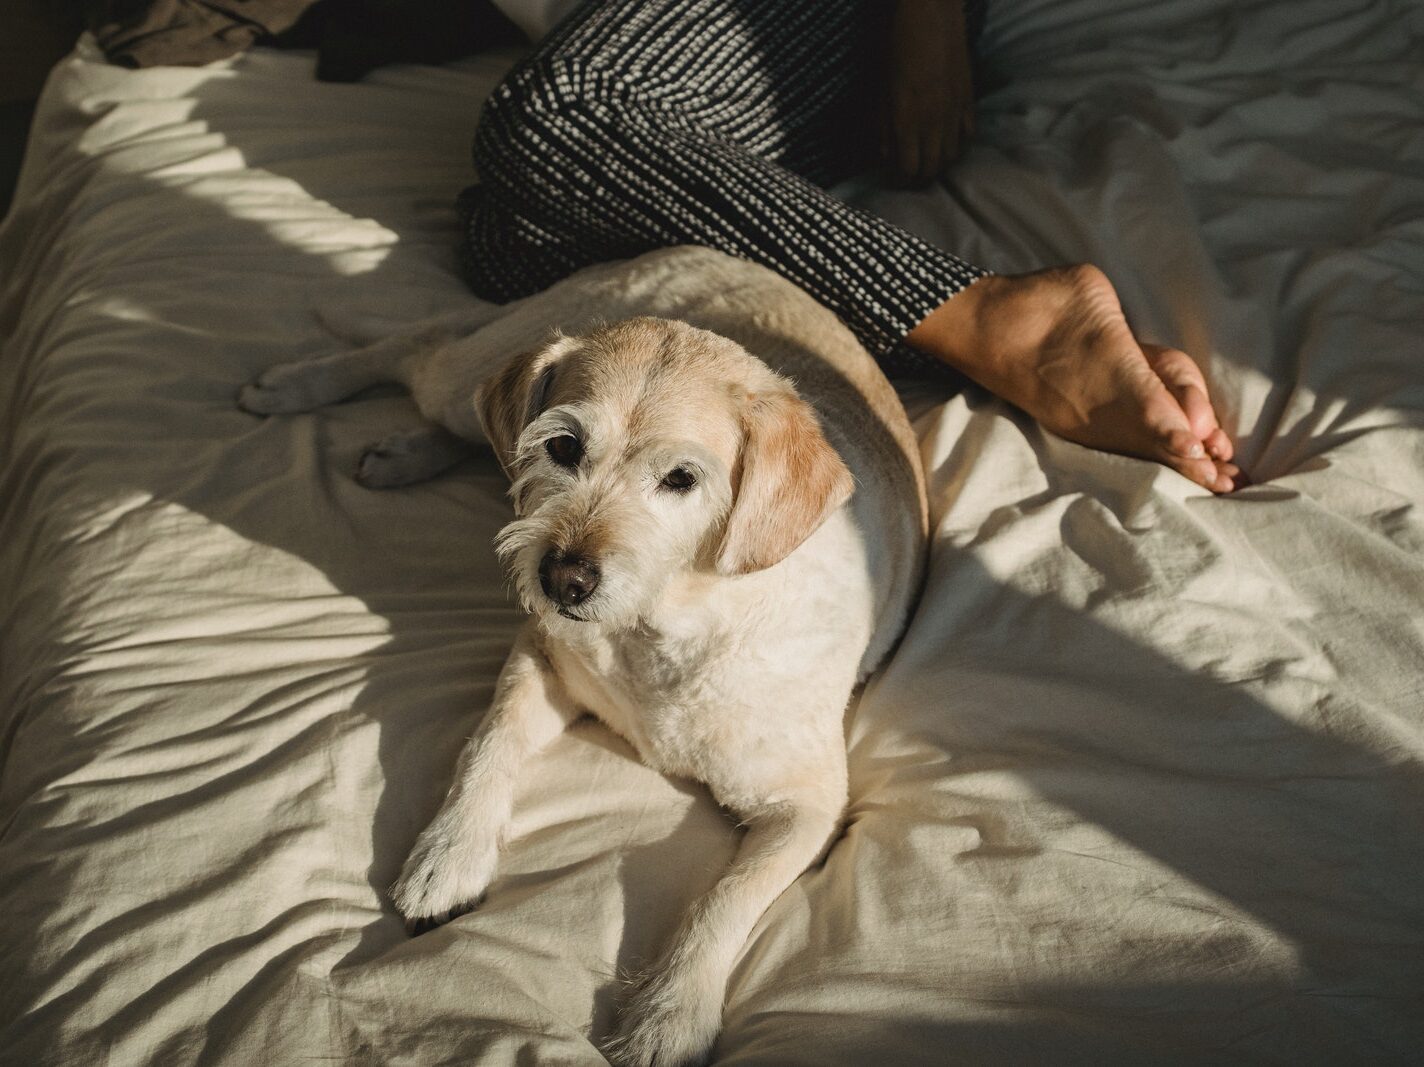 Cut dog sitting near anonymous woman lying on bed